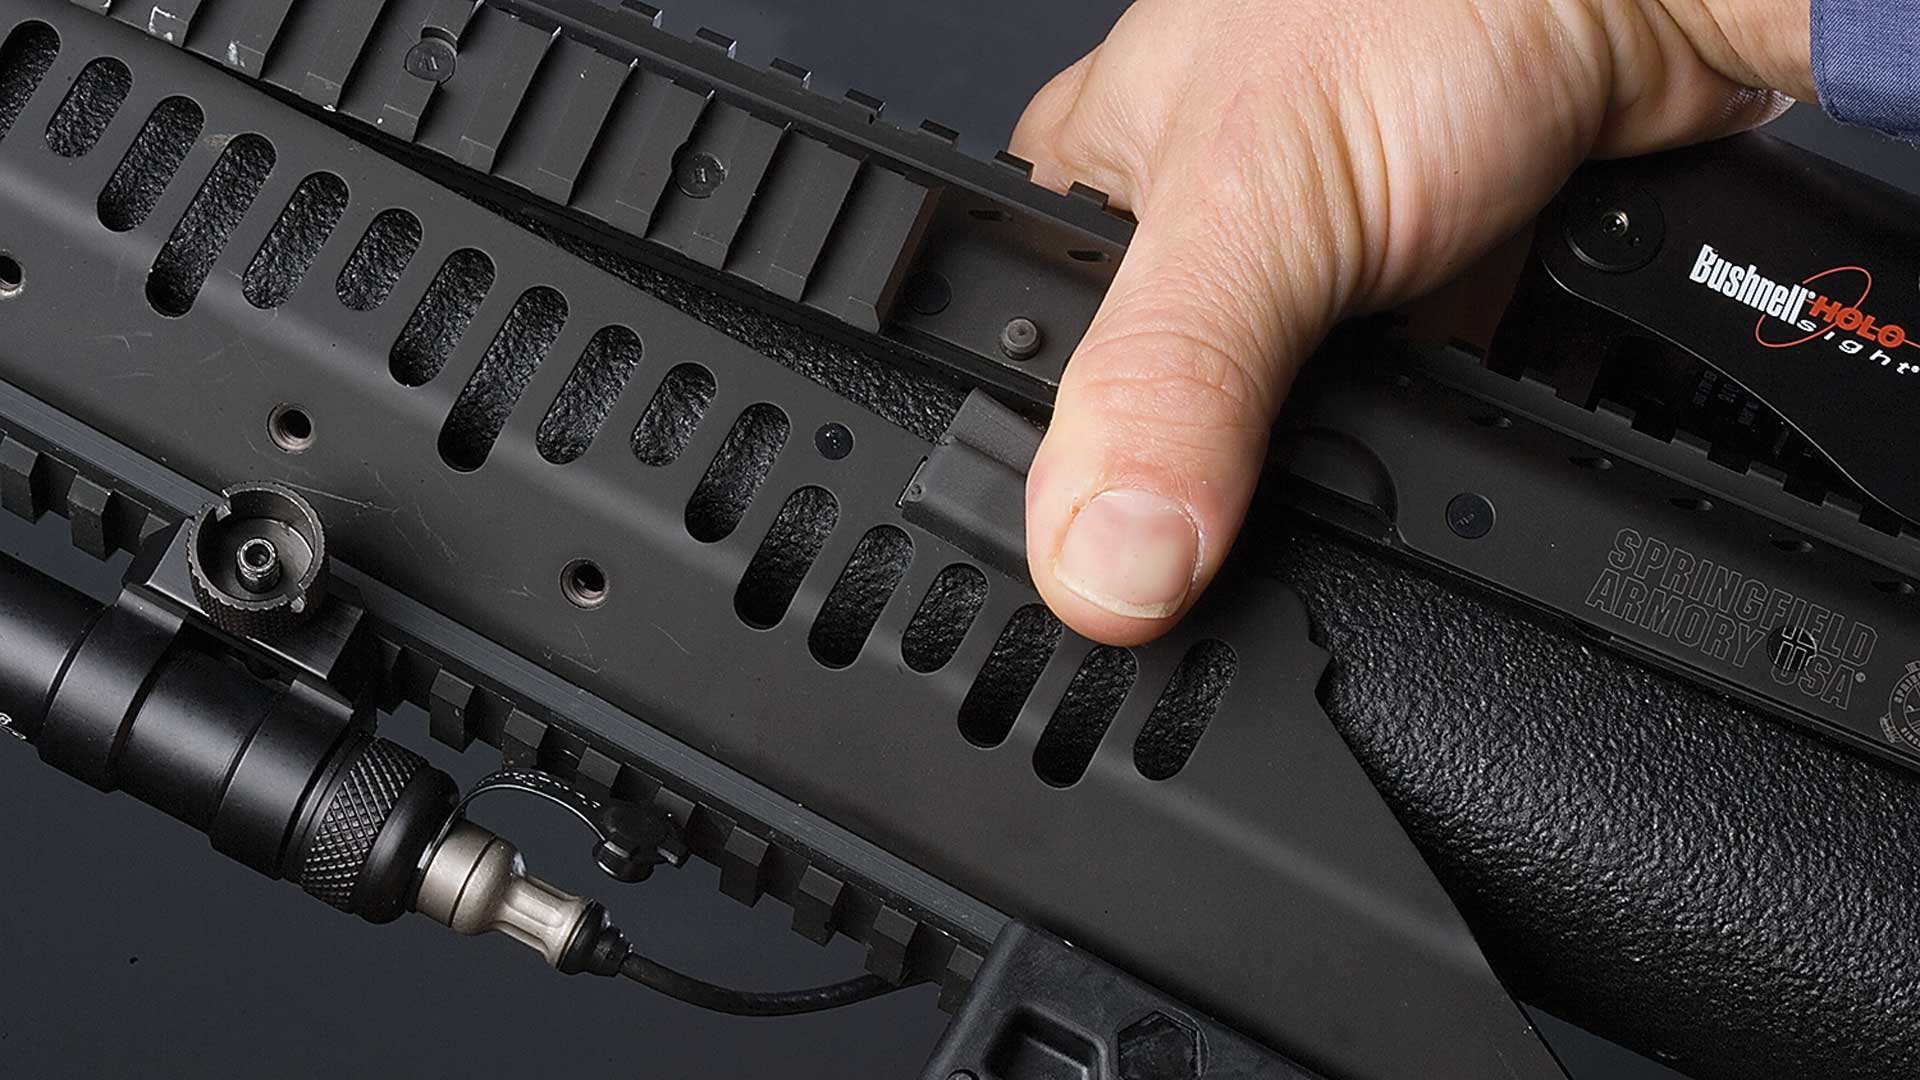 Removing the bottom portion of the SOCOM II’s Cluster Rail System is as easy as depressing two buttons and swinging the unit away from the rifle.